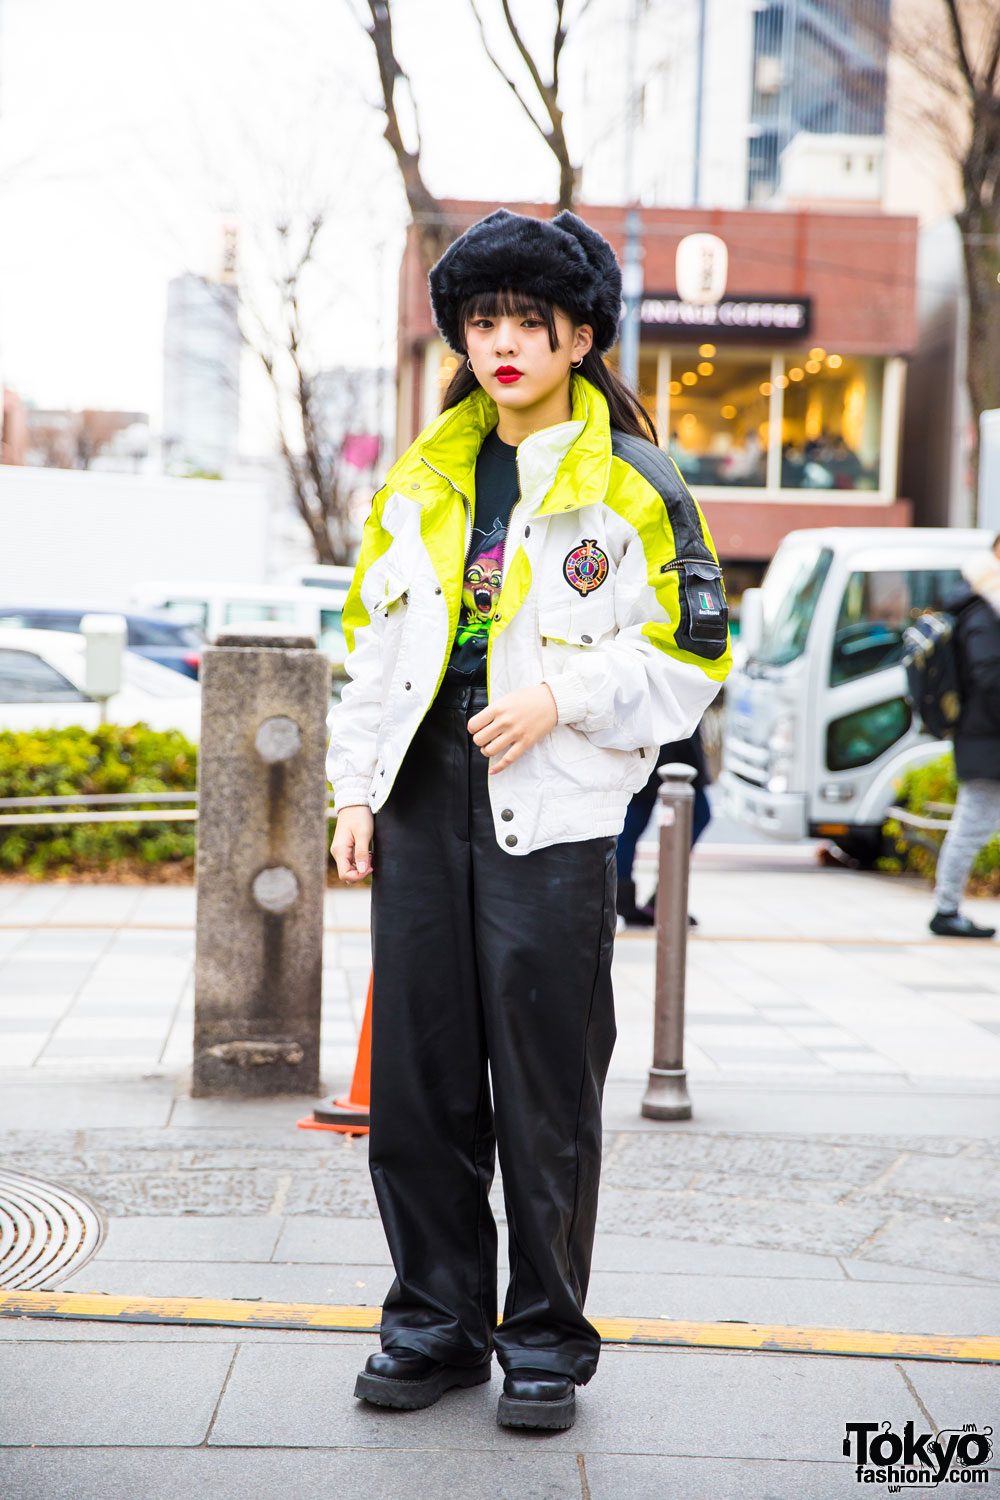 Harajuku Girl in Winter Style w/ Resale Jacket, Oh Pearl Leather Pants & Bubbles Shoes